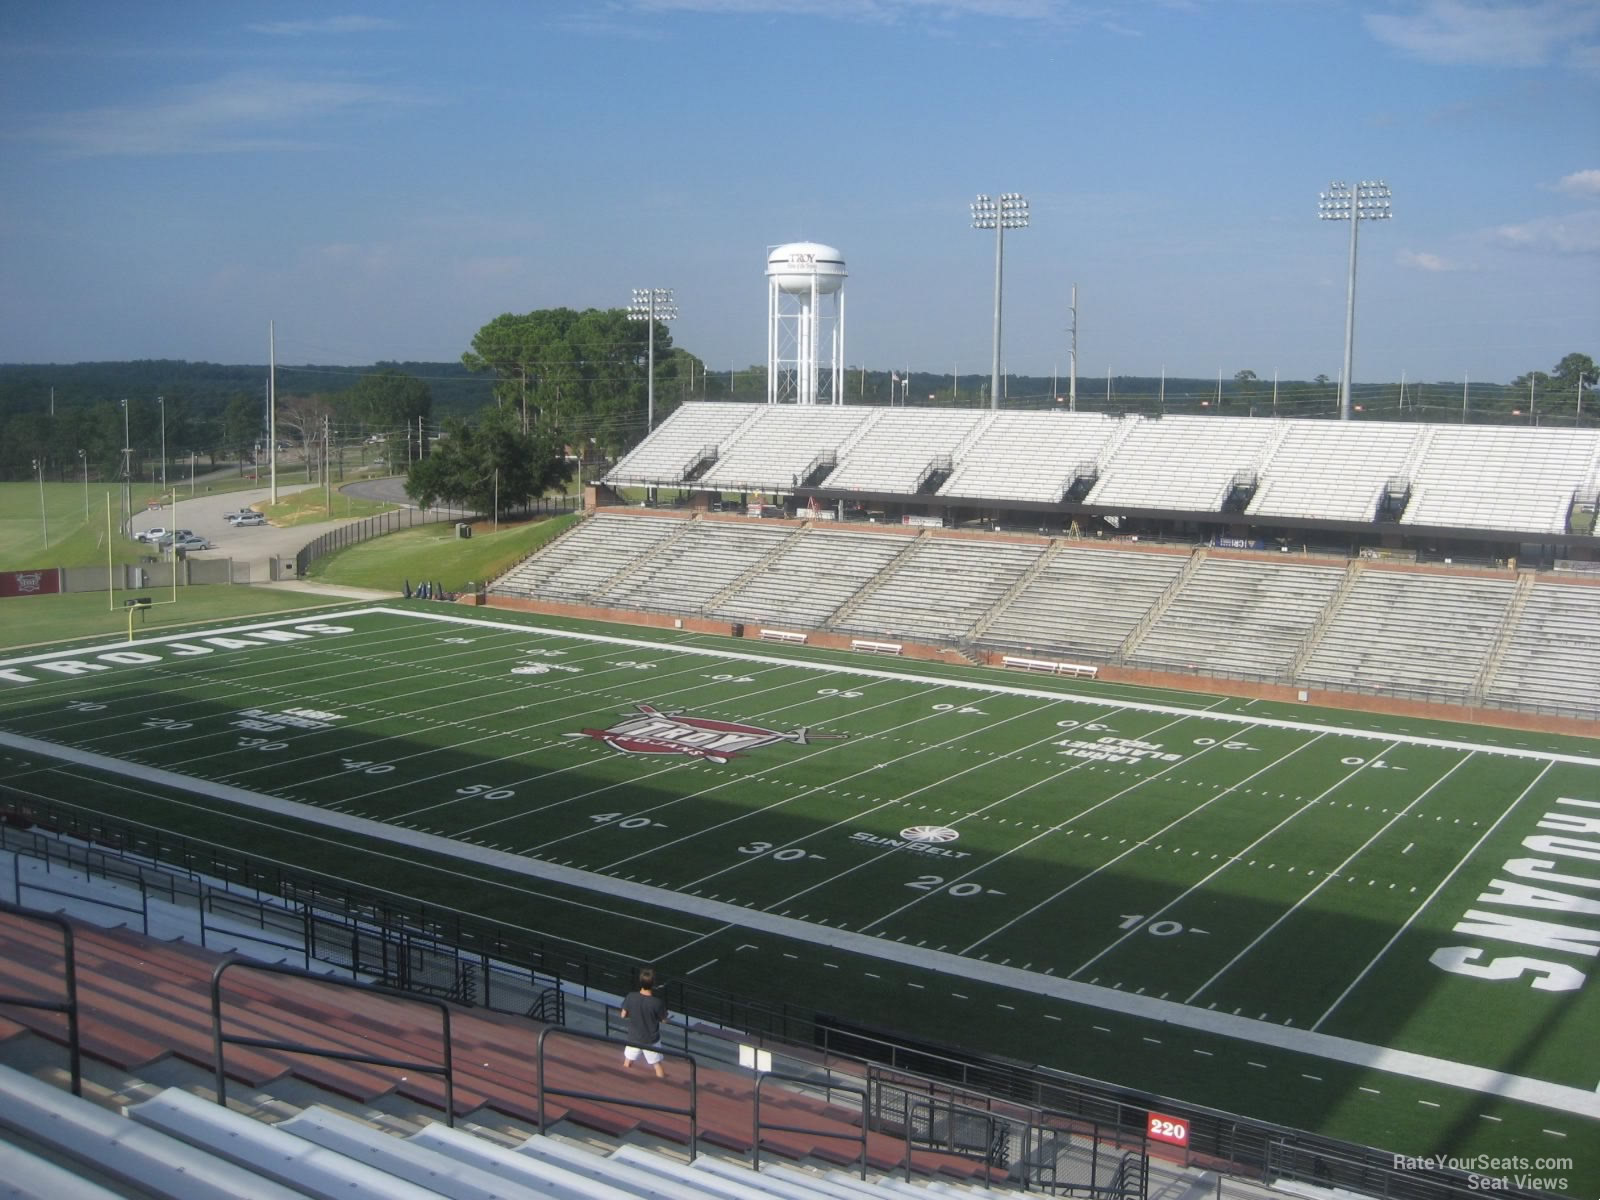 section 222, row 31 seat view  - troy memorial stadium